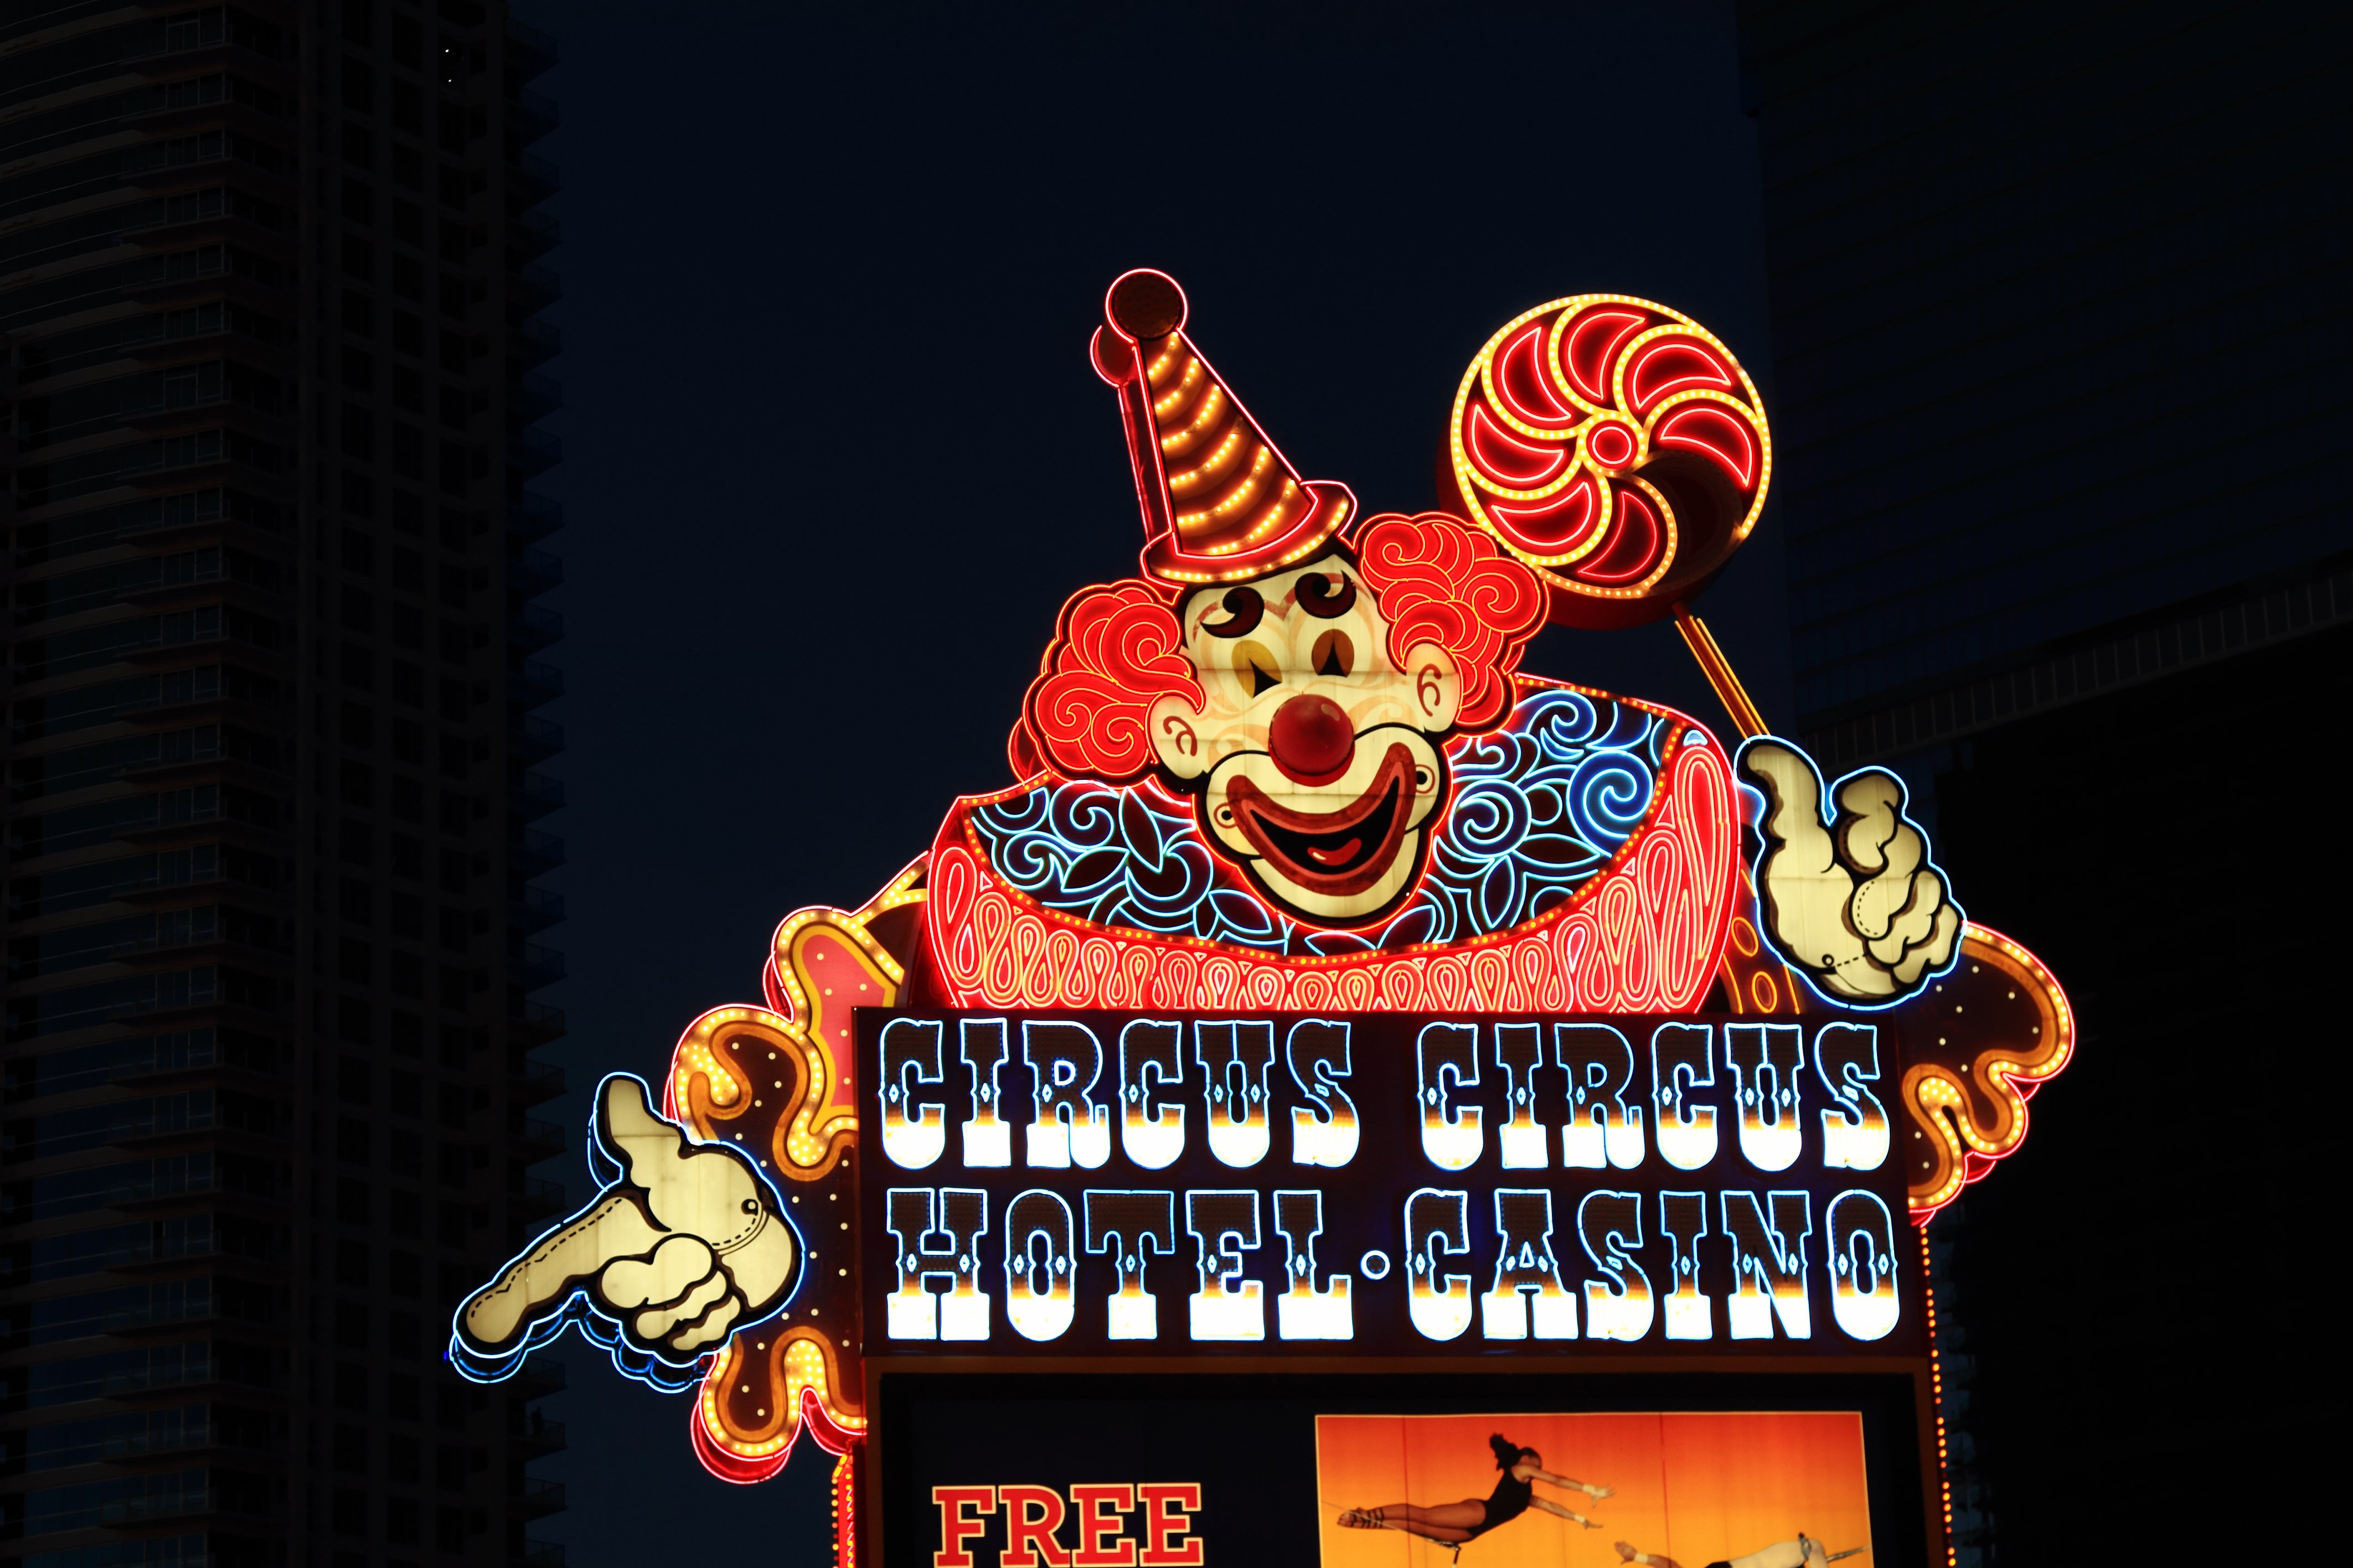 Hotels, casinos filled with ghost stories in Las Vegas